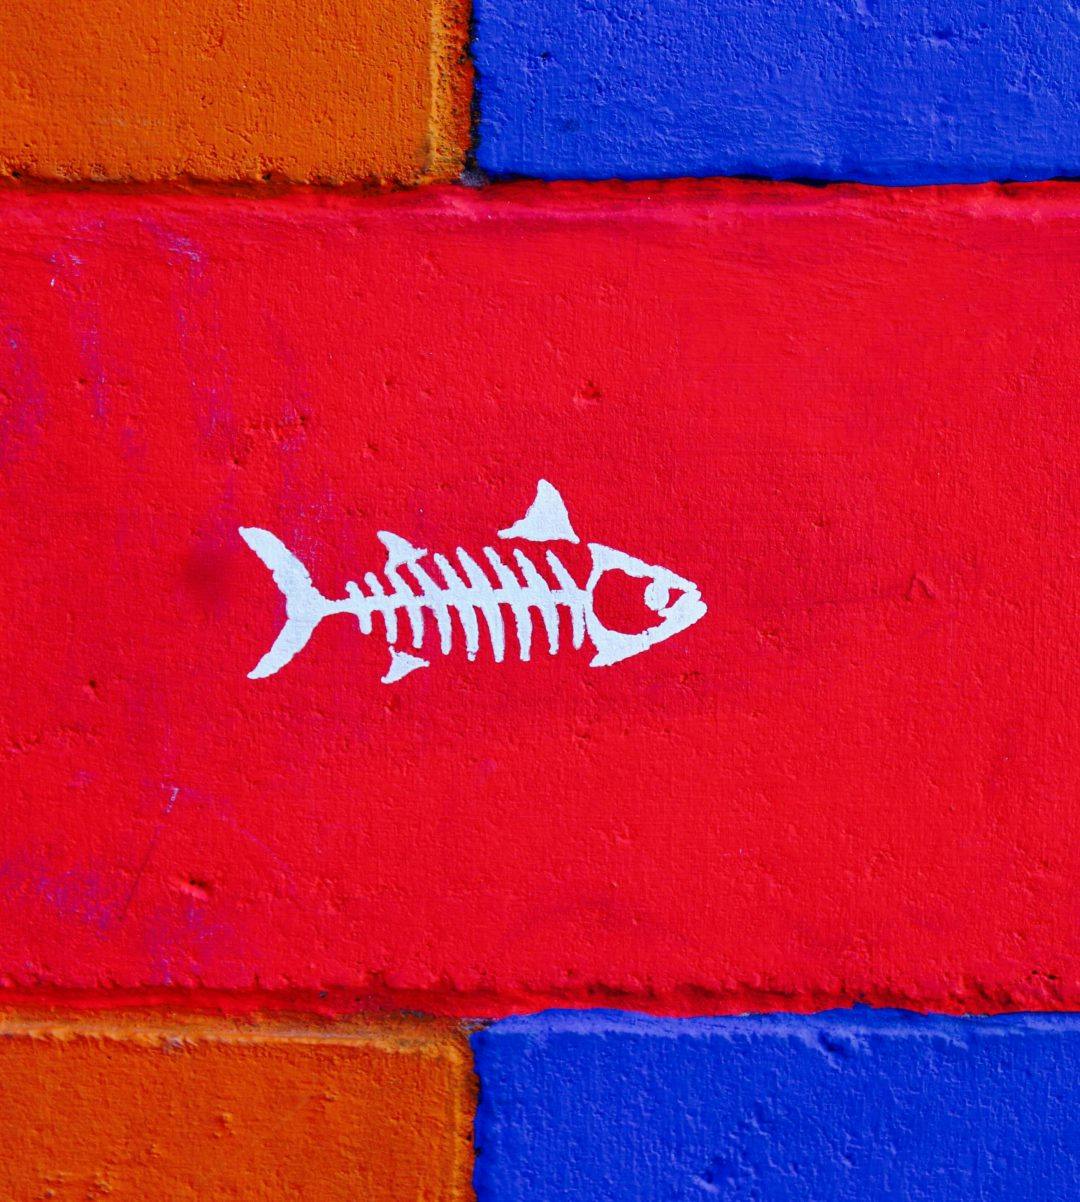 A stencil painting of a fish